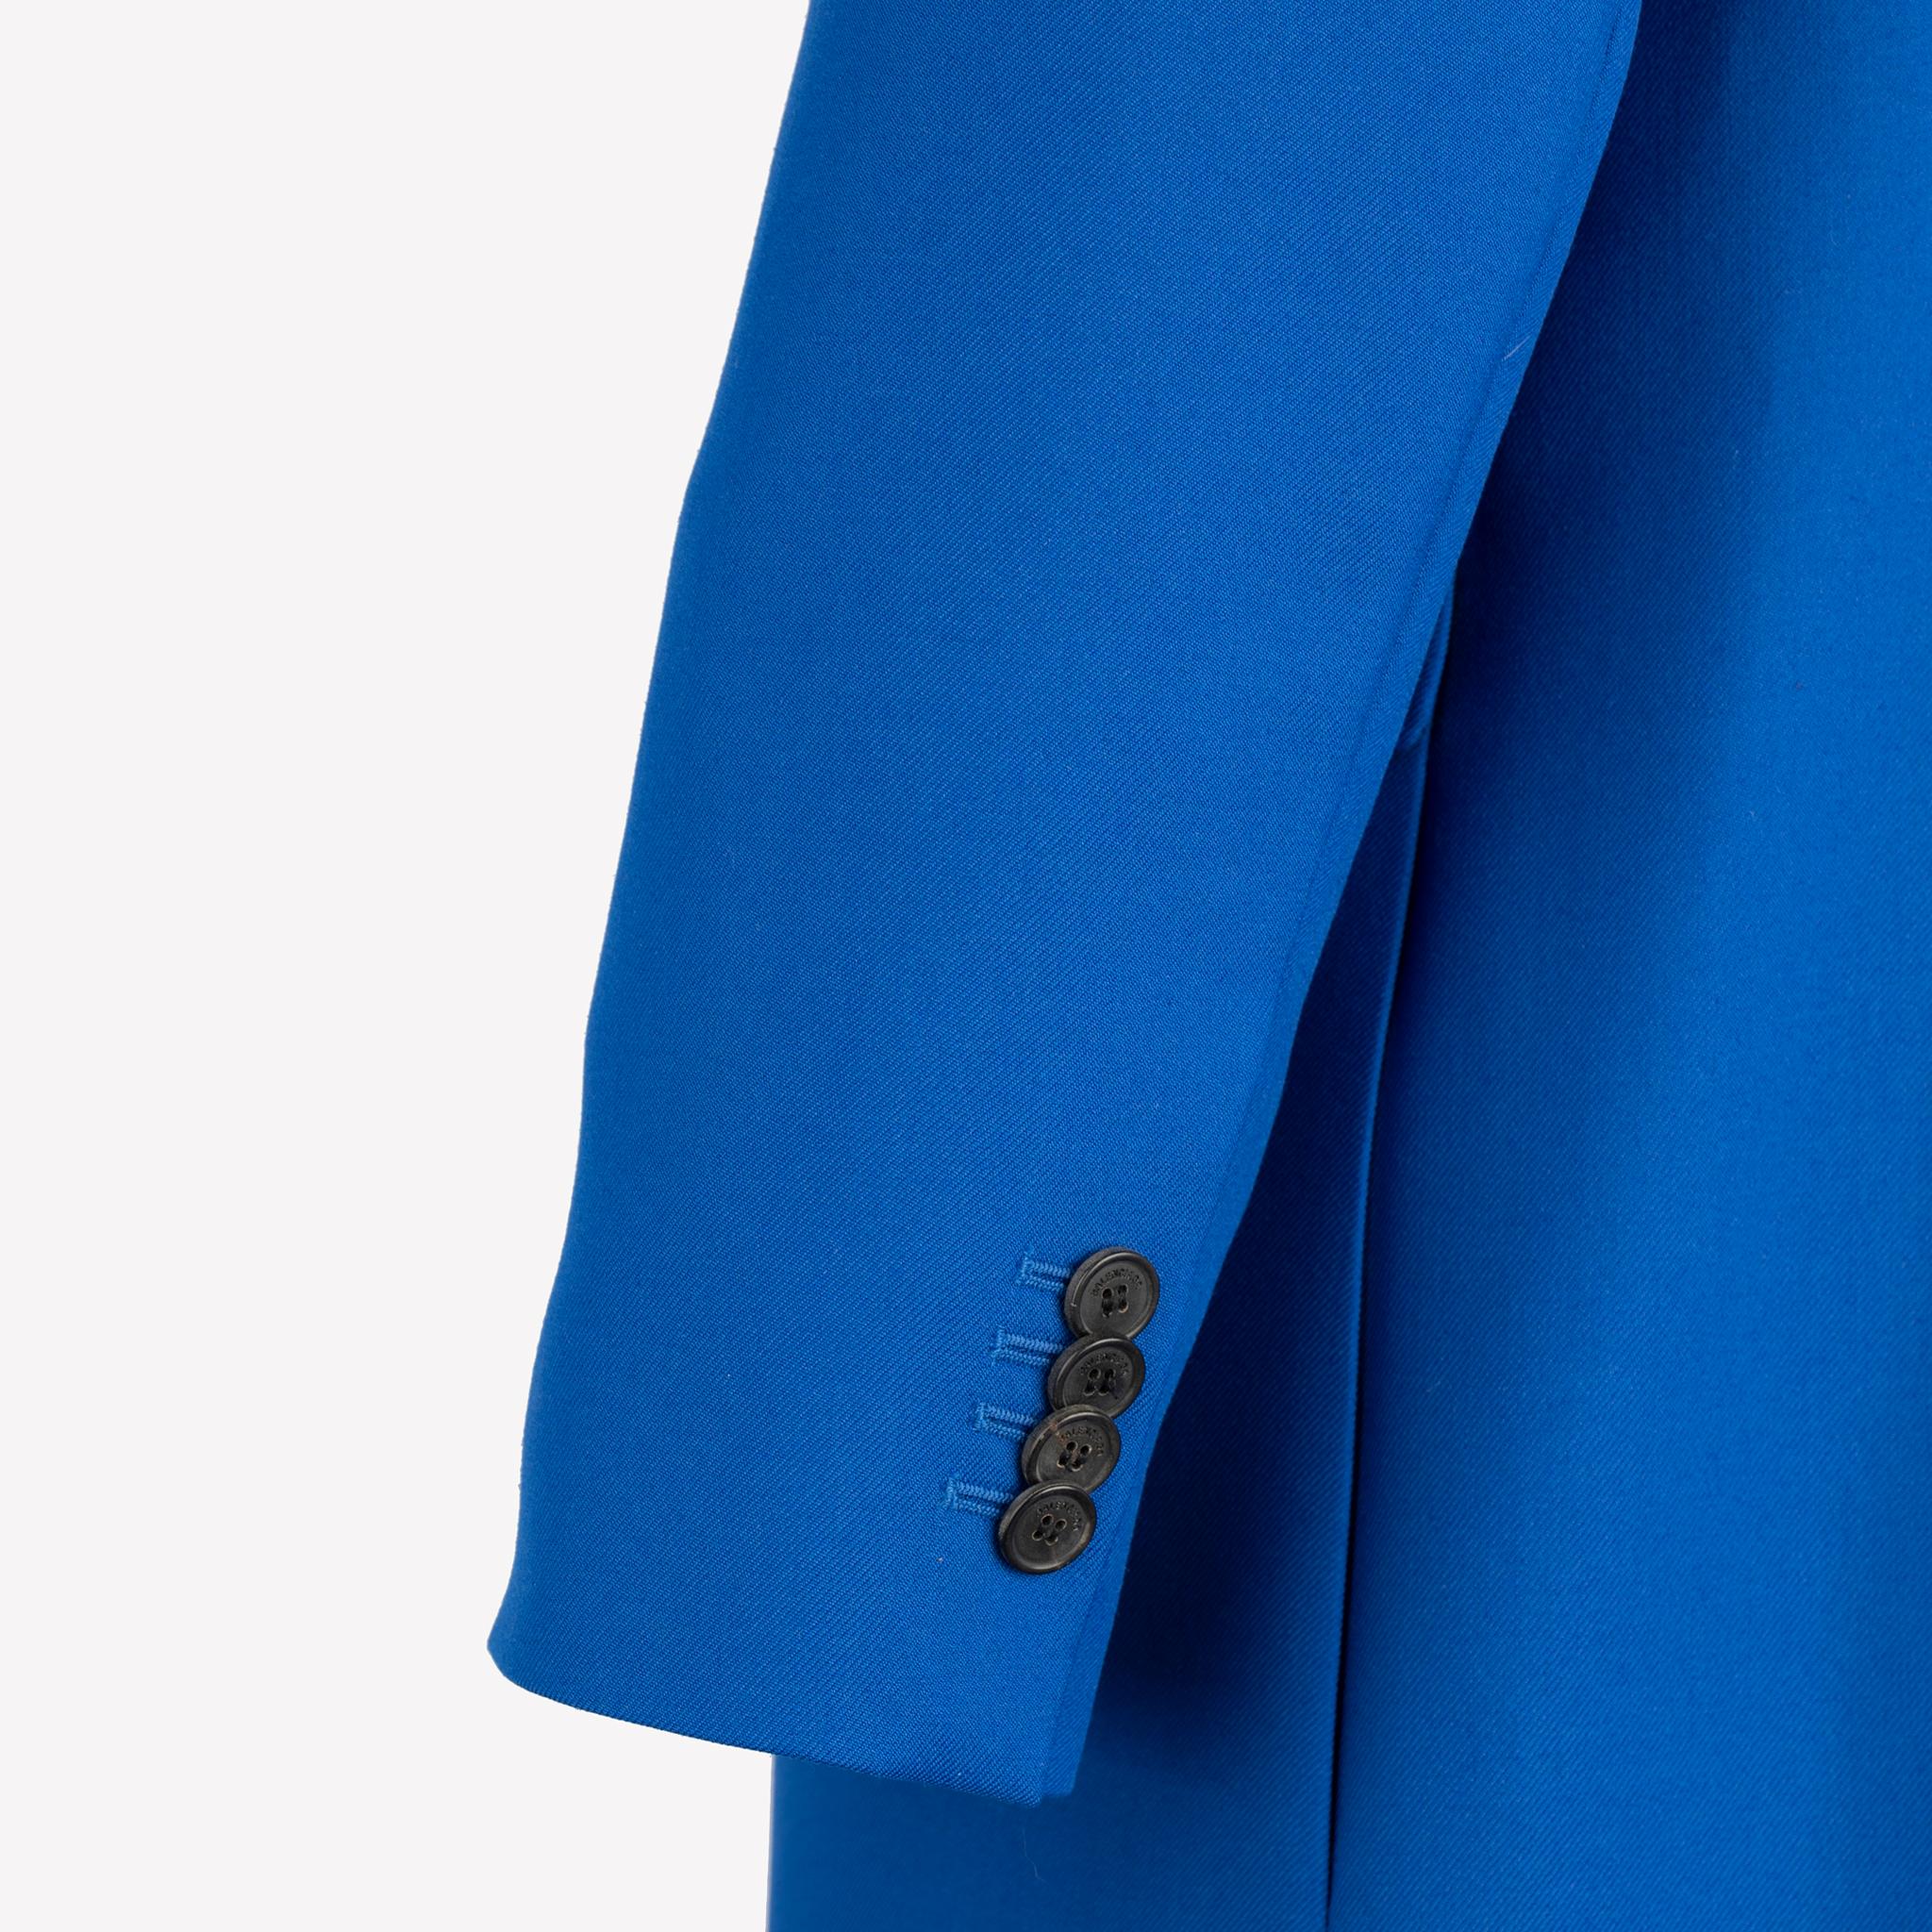 Balenciaga Hourglass Double Breasted Wool Blend Coat Royal Blue 38 FR For Sale 3